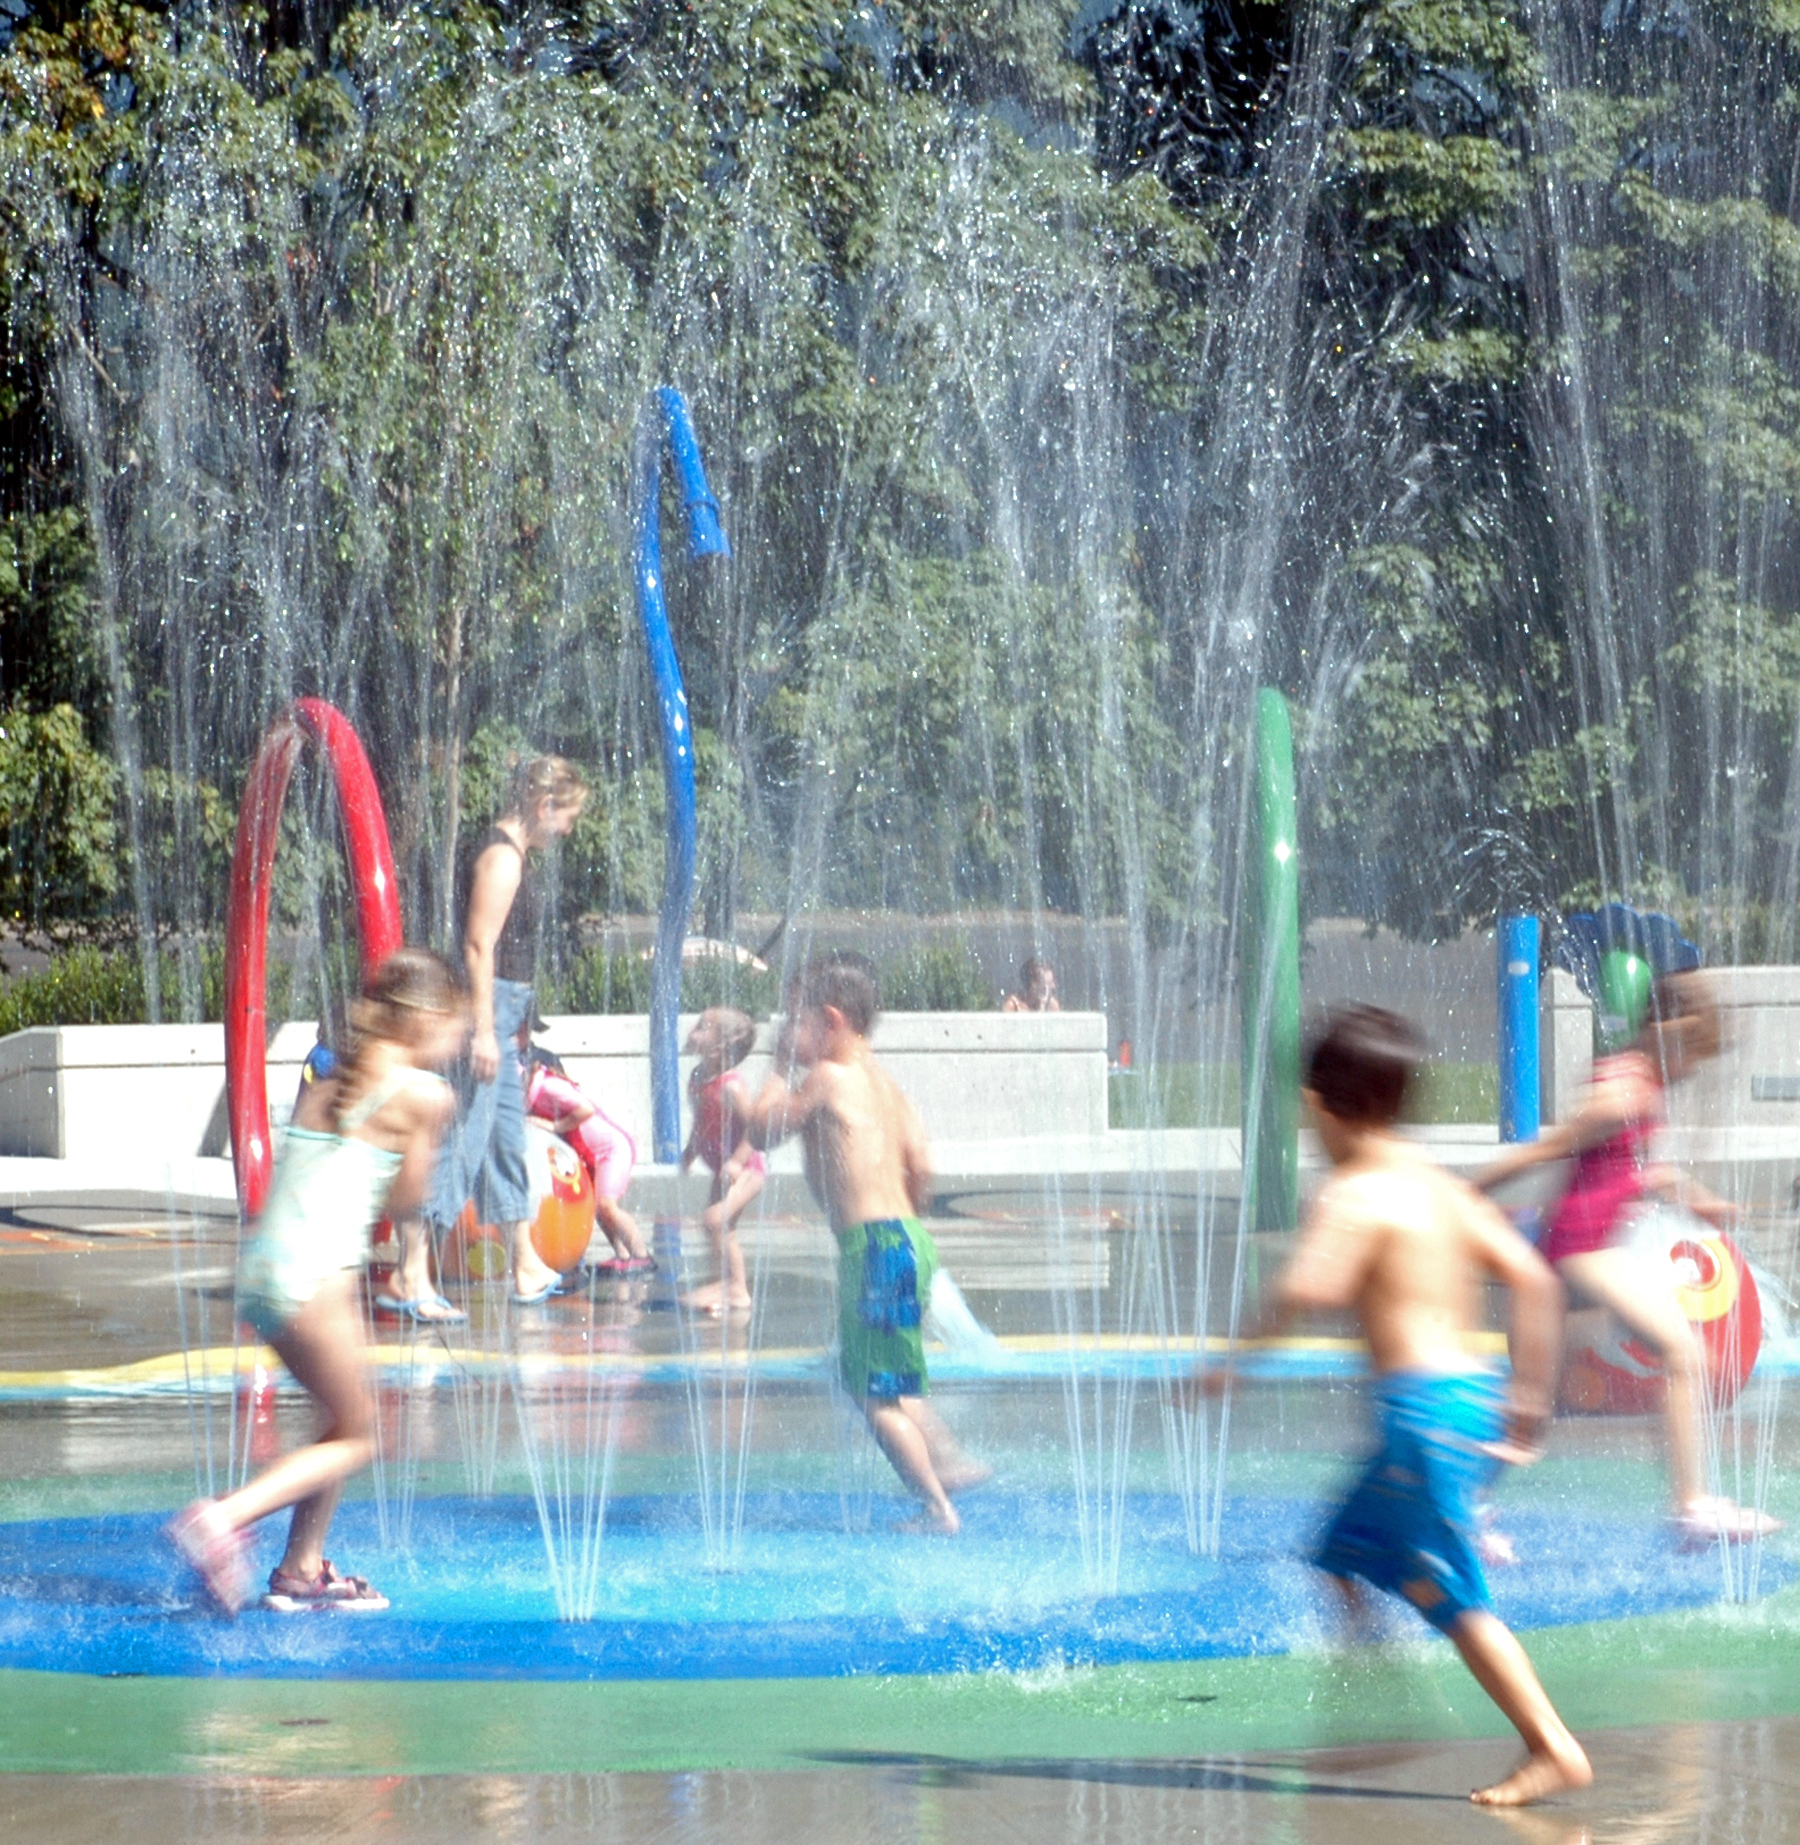 Children play in a splash pad with water streams and colorful structures